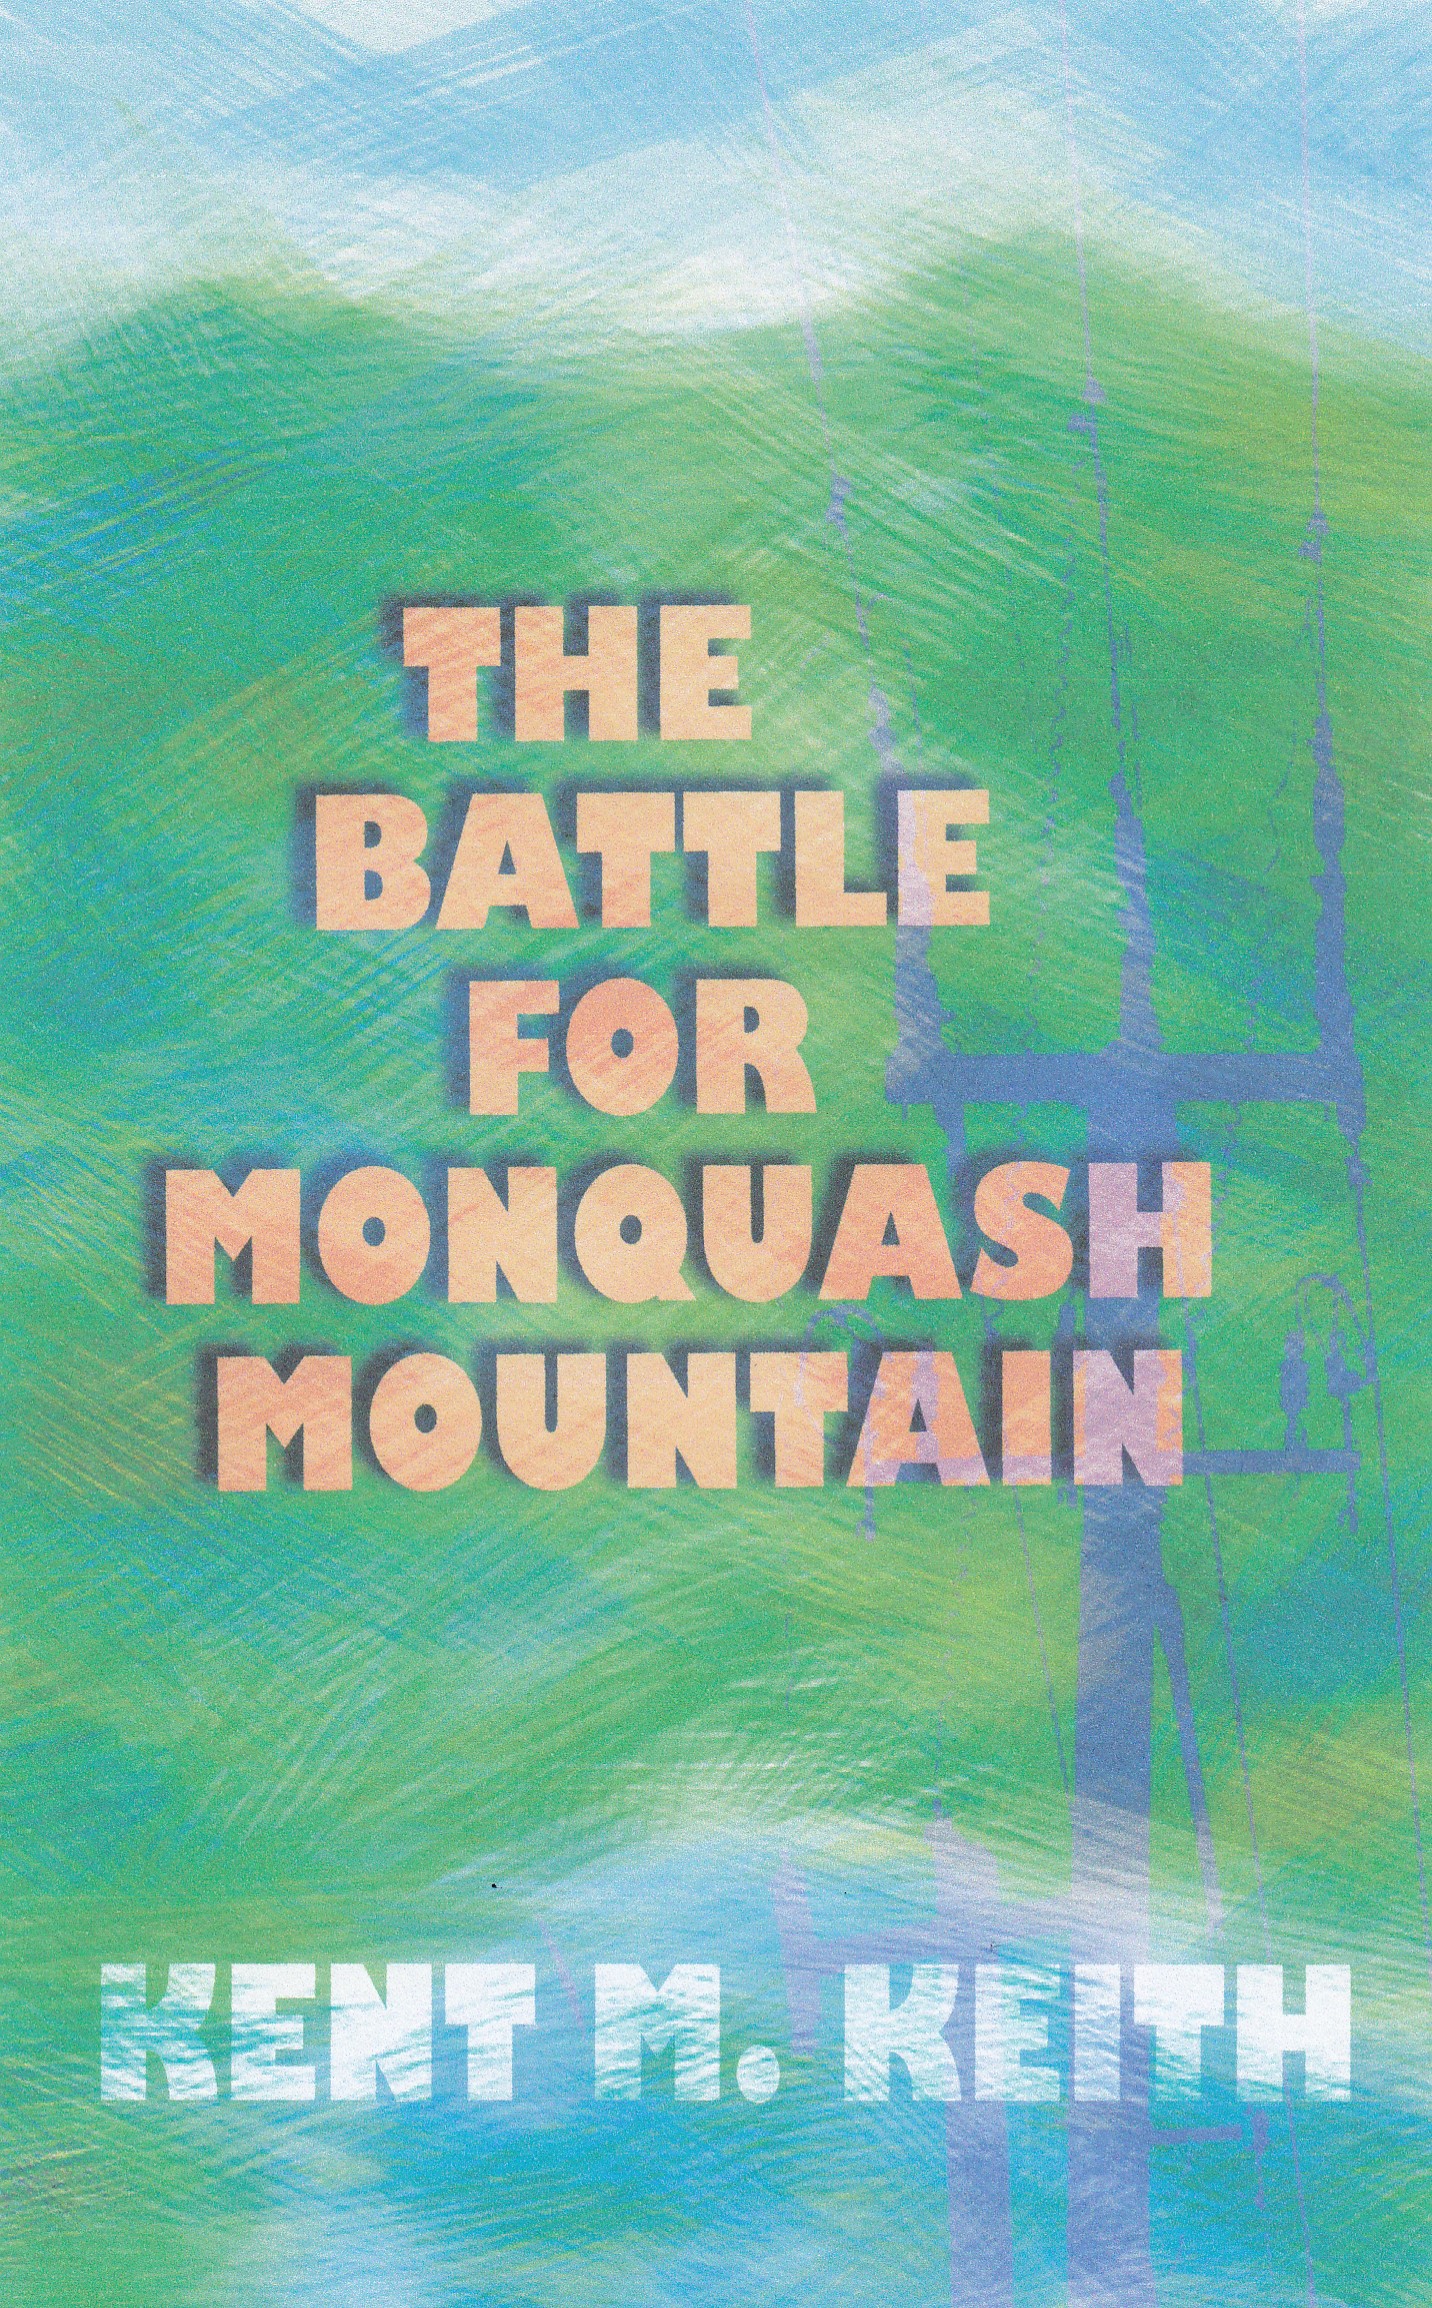 Photo of the cover of the book, The Battle for Monquash Mountain